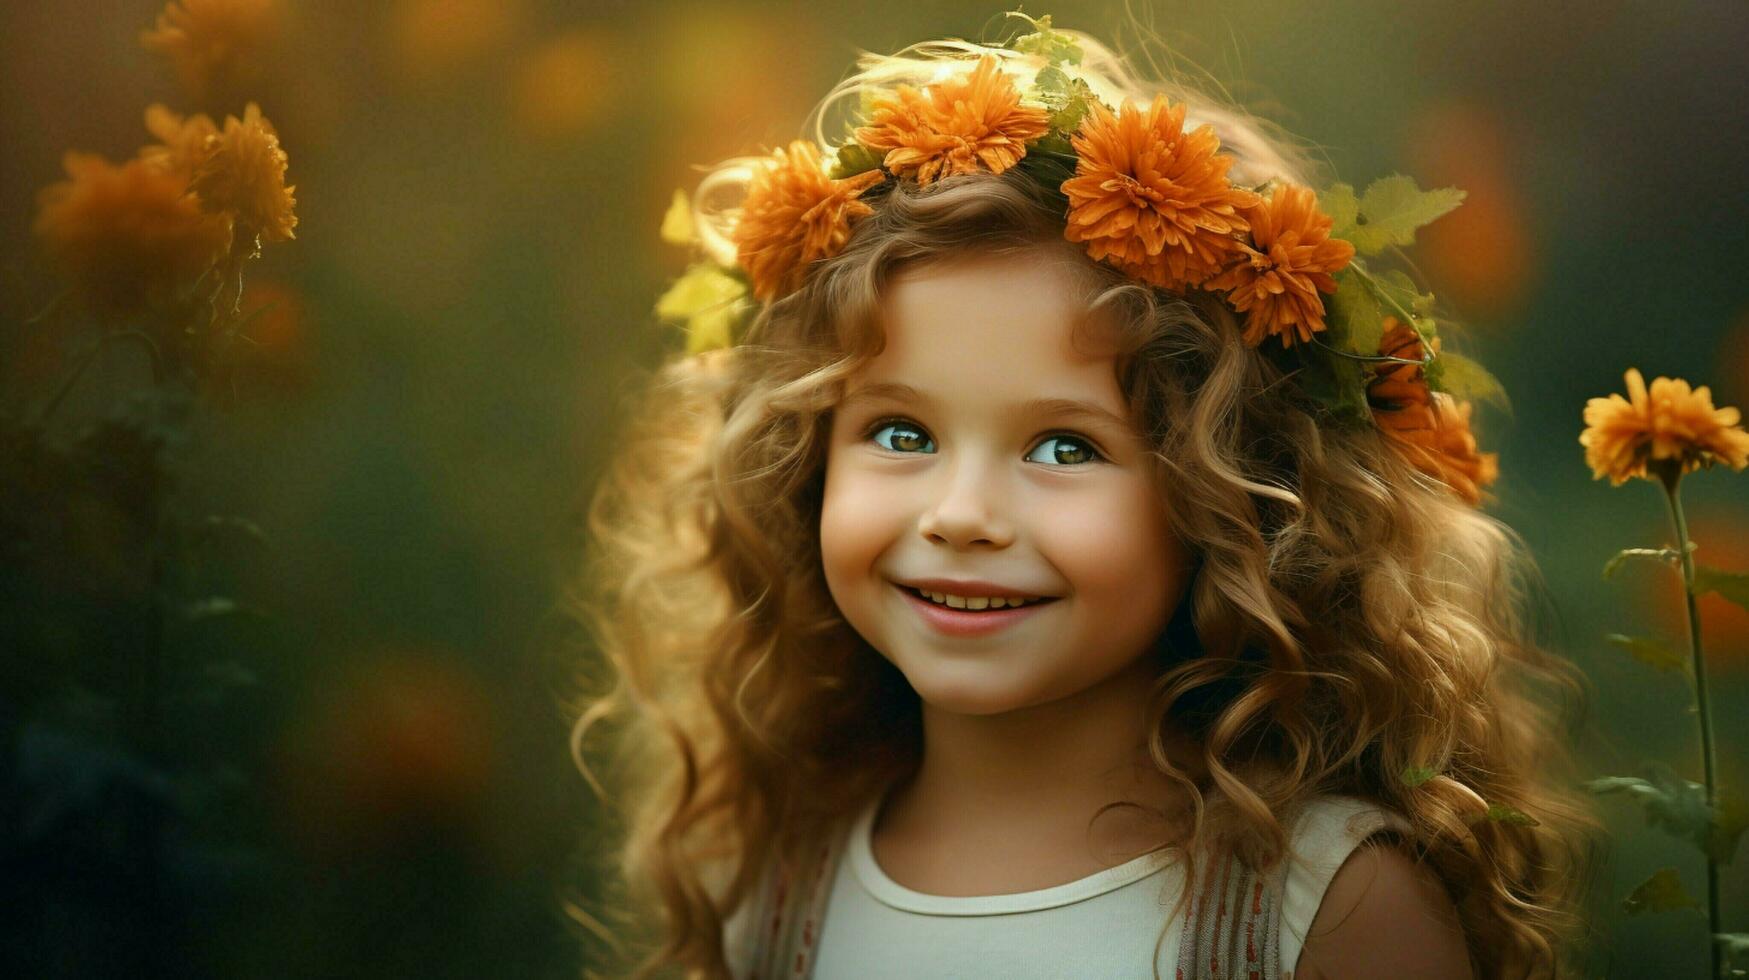 smiling child outdoors happiness in nature cute portrait photo